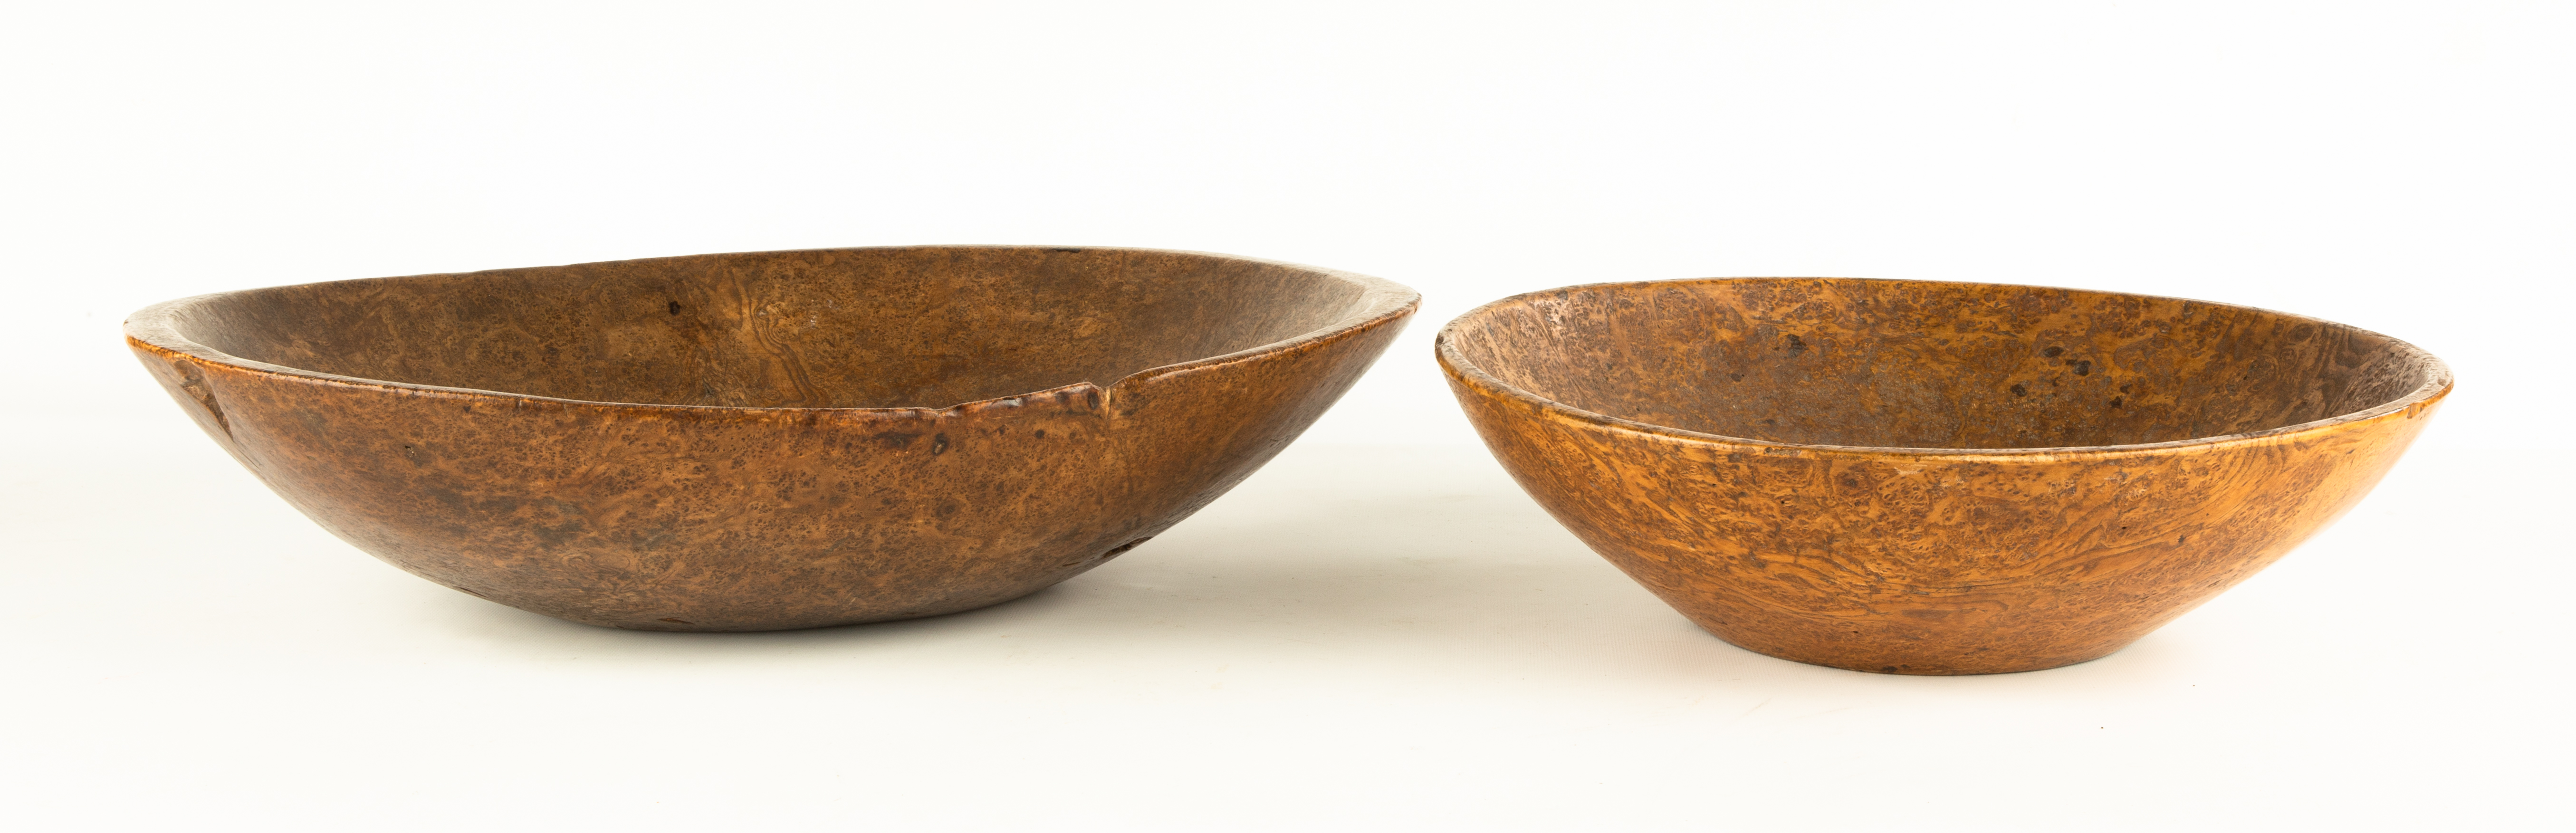 TWO EARLY AMERICAN BURL BOWLS Early 35315e